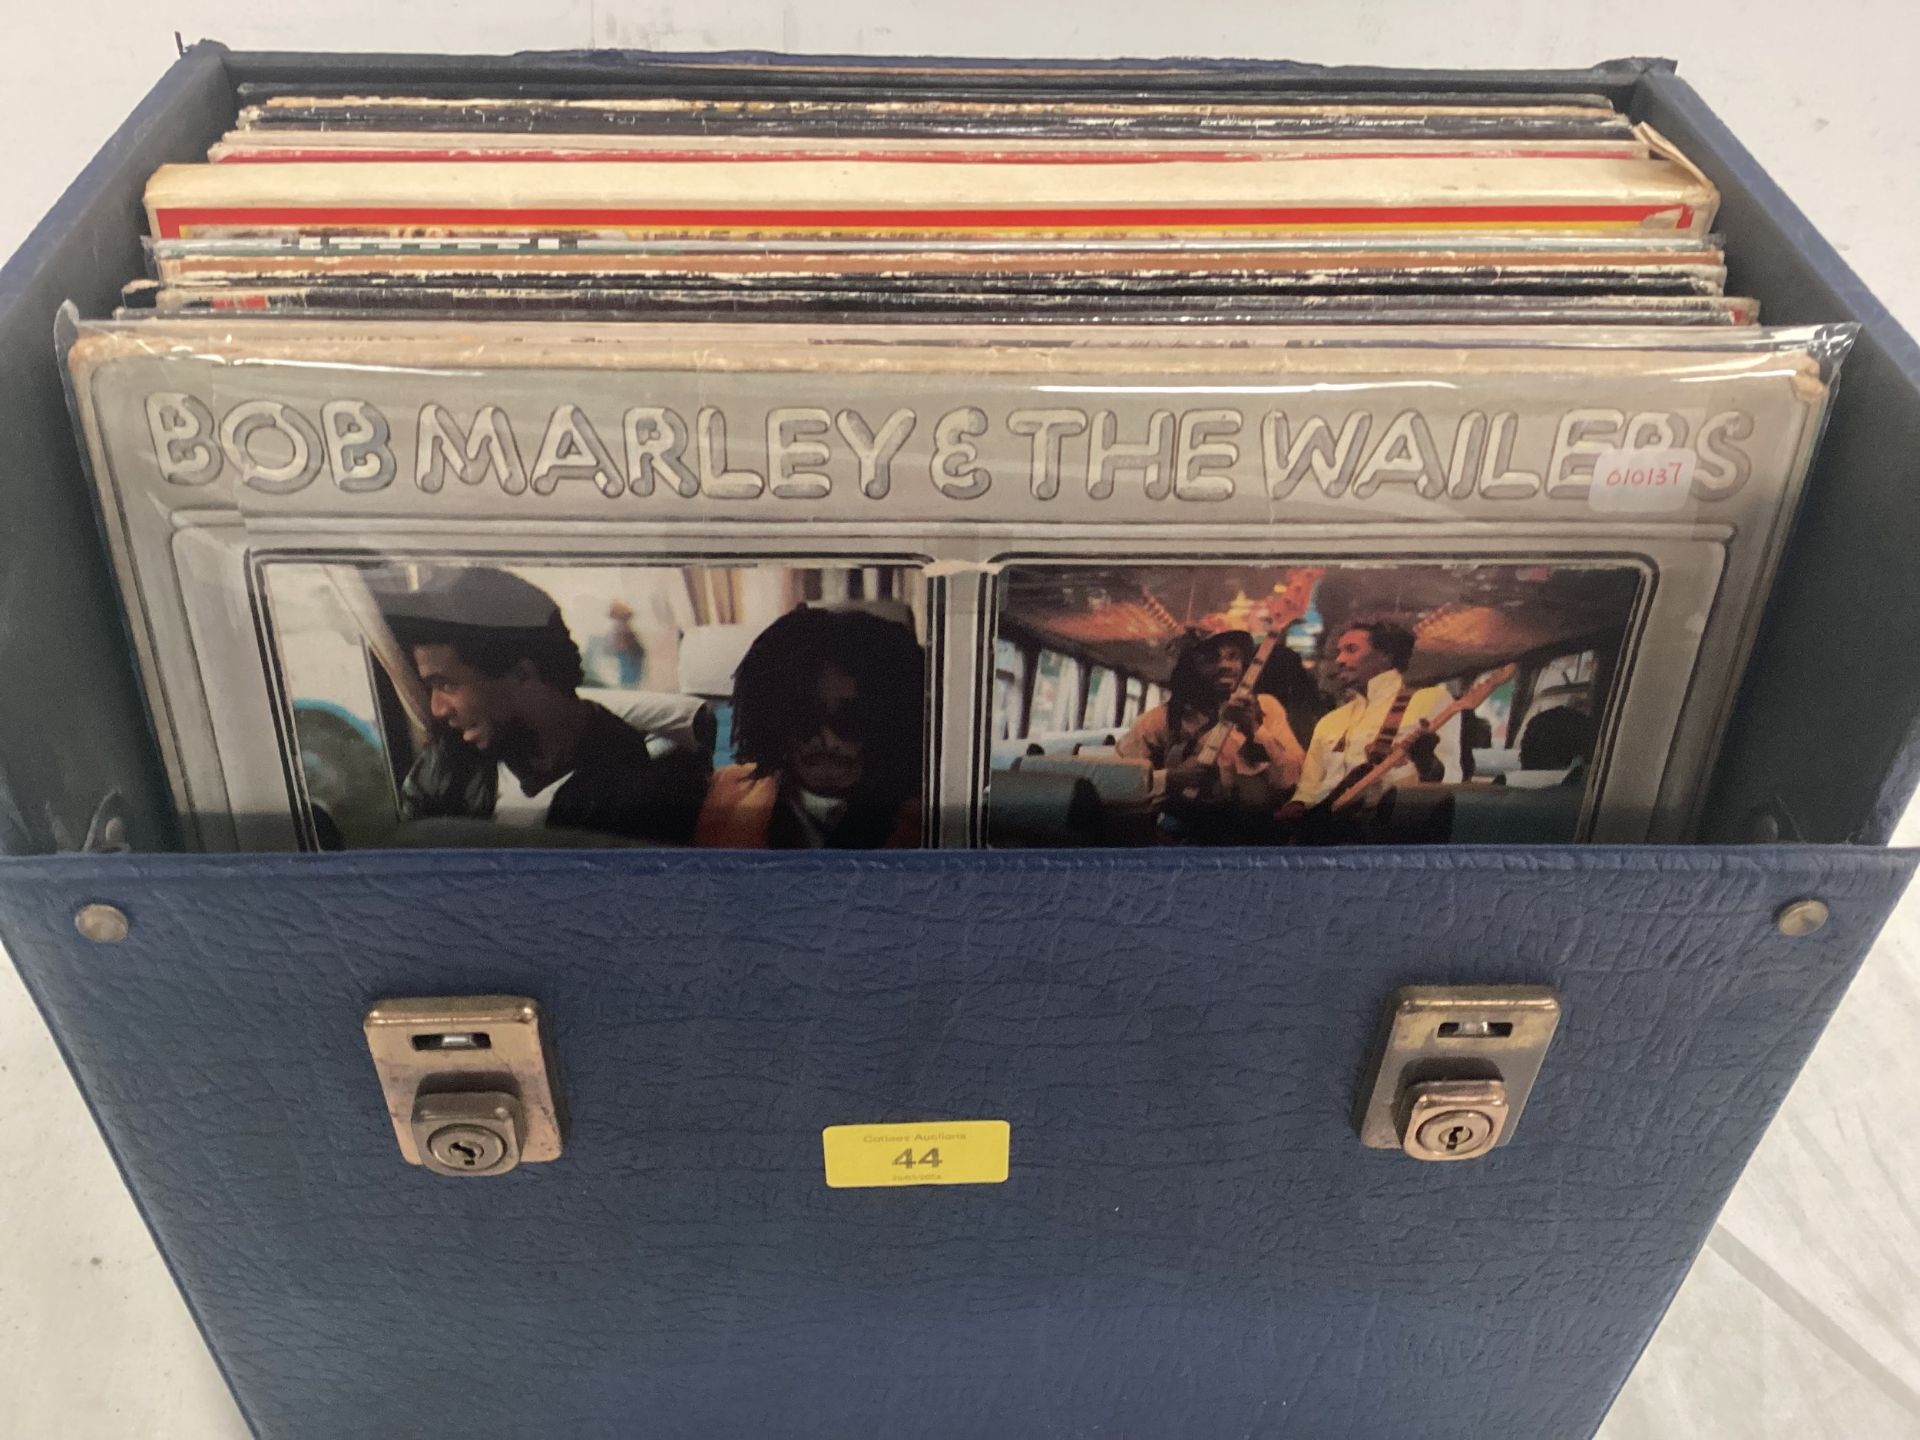 CASE OF VARIOUS BOB MARLEY AND THE WAILERS VINYL LP RECORDS. Here we find various titles to